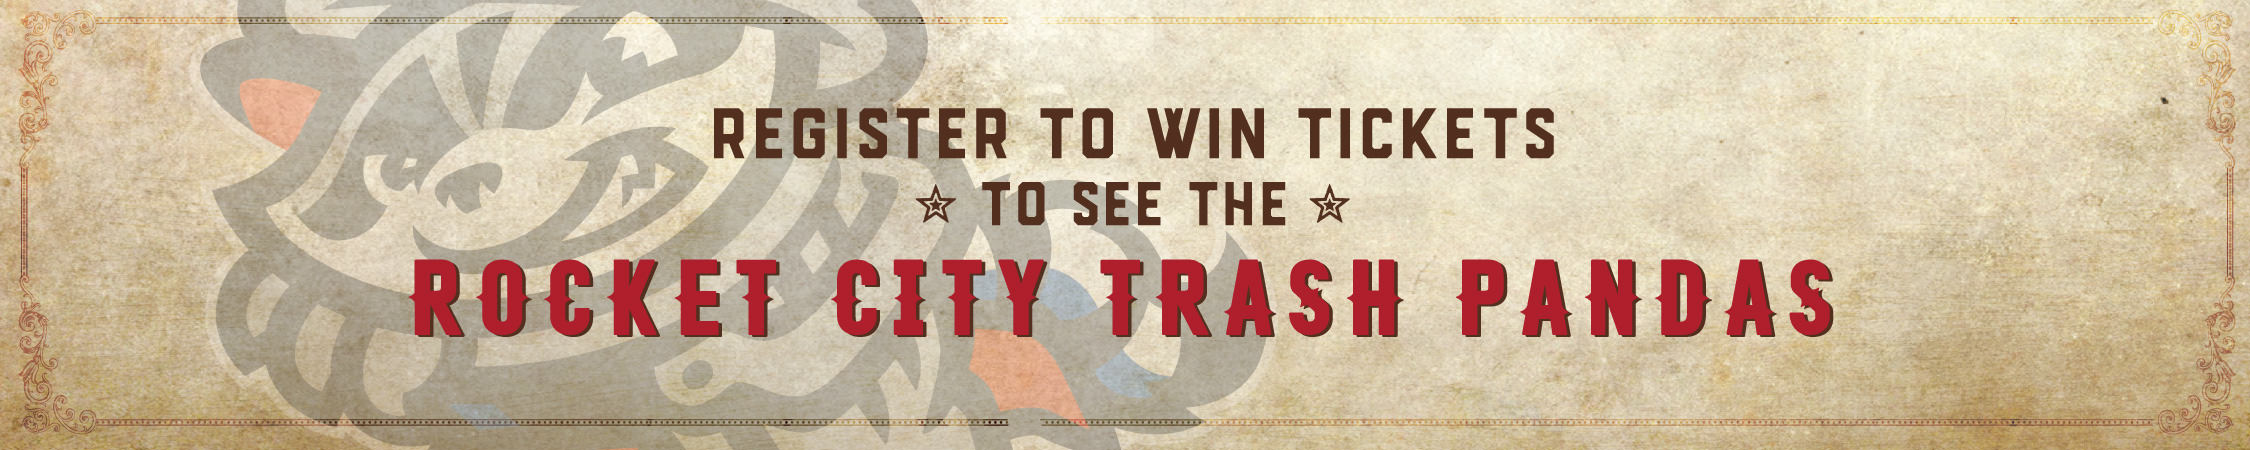 Enter to Win Tickets for the Rocket City Trash Pandas